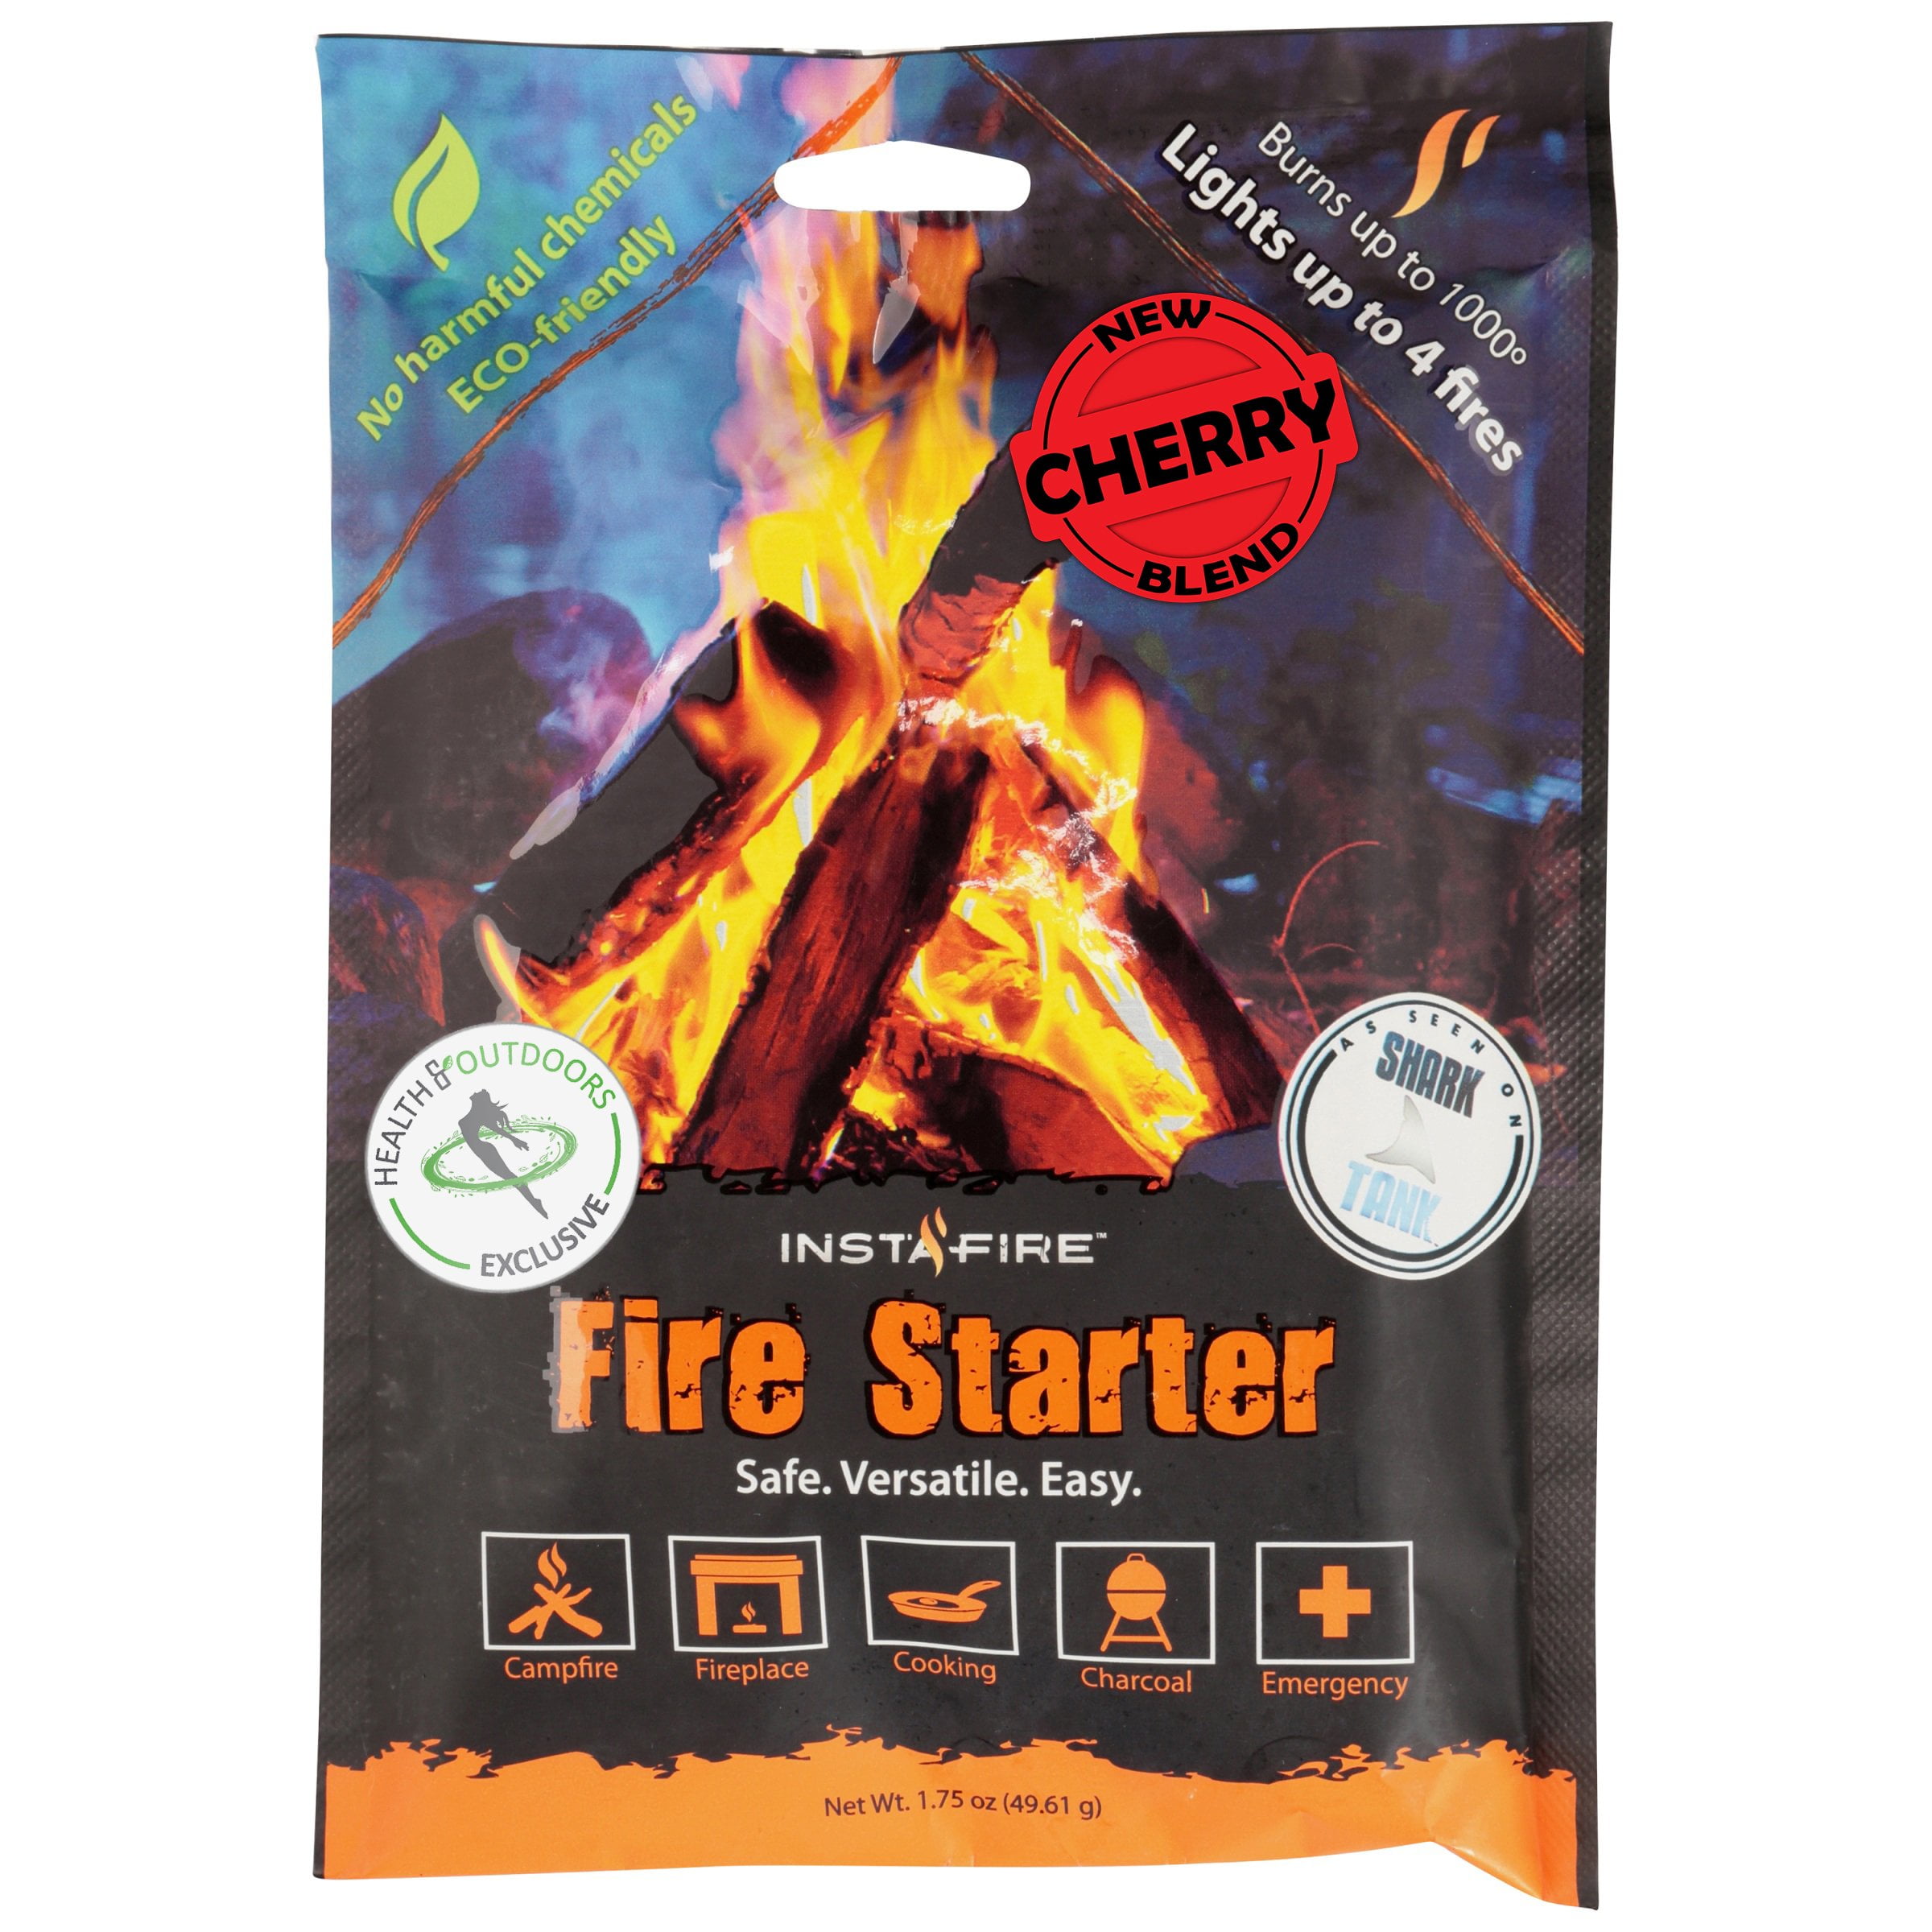 InstaFire 2-Gallon Bucket of Eco-Friendly Granulated Bulk Charcoal Briquette Starter and One Pack of Fire Starter 